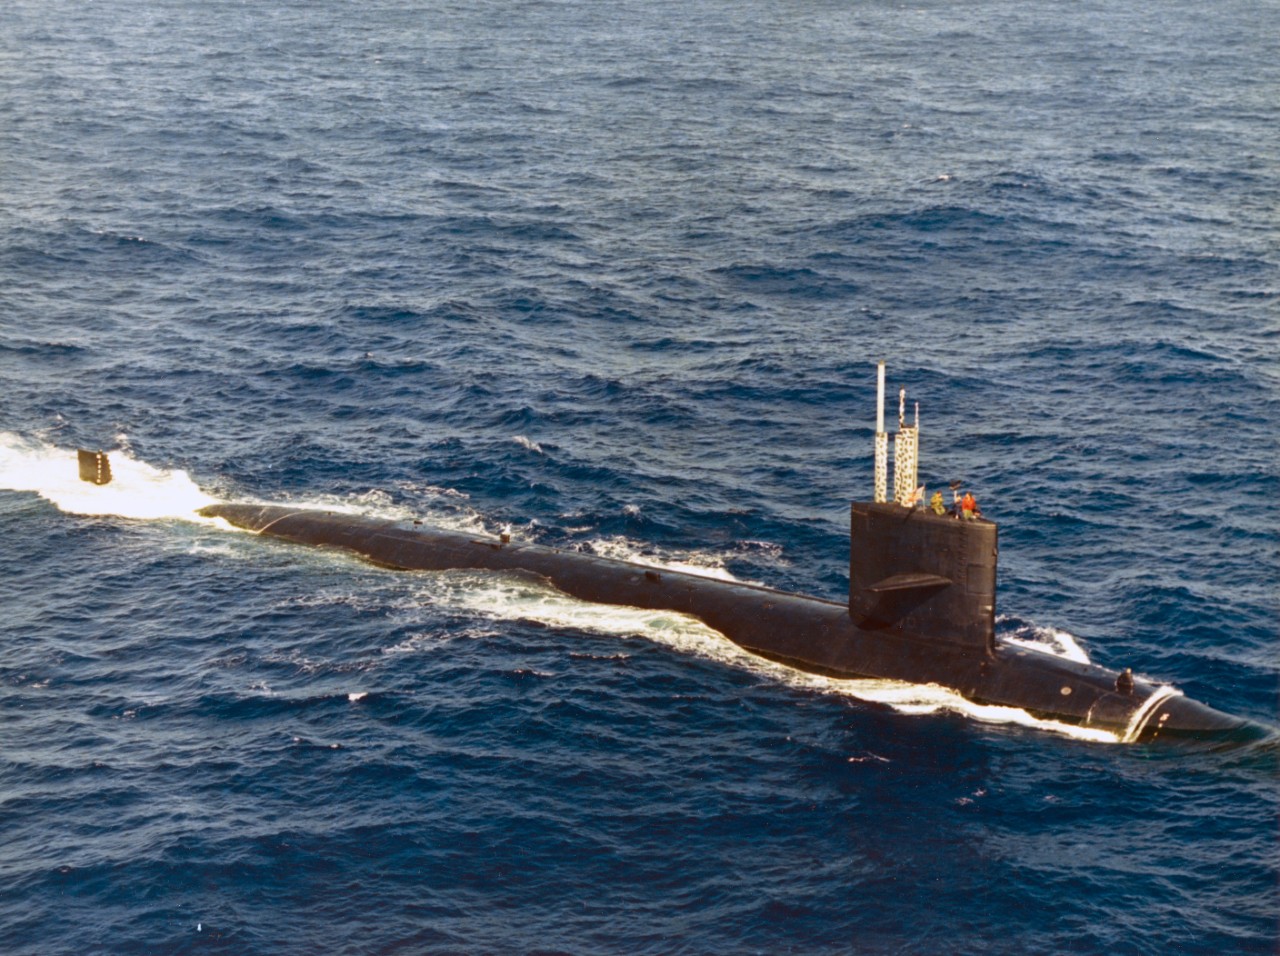 Starboard aerial view of nuclear powered attack submarine USS Seahorse (SSN-669) underway